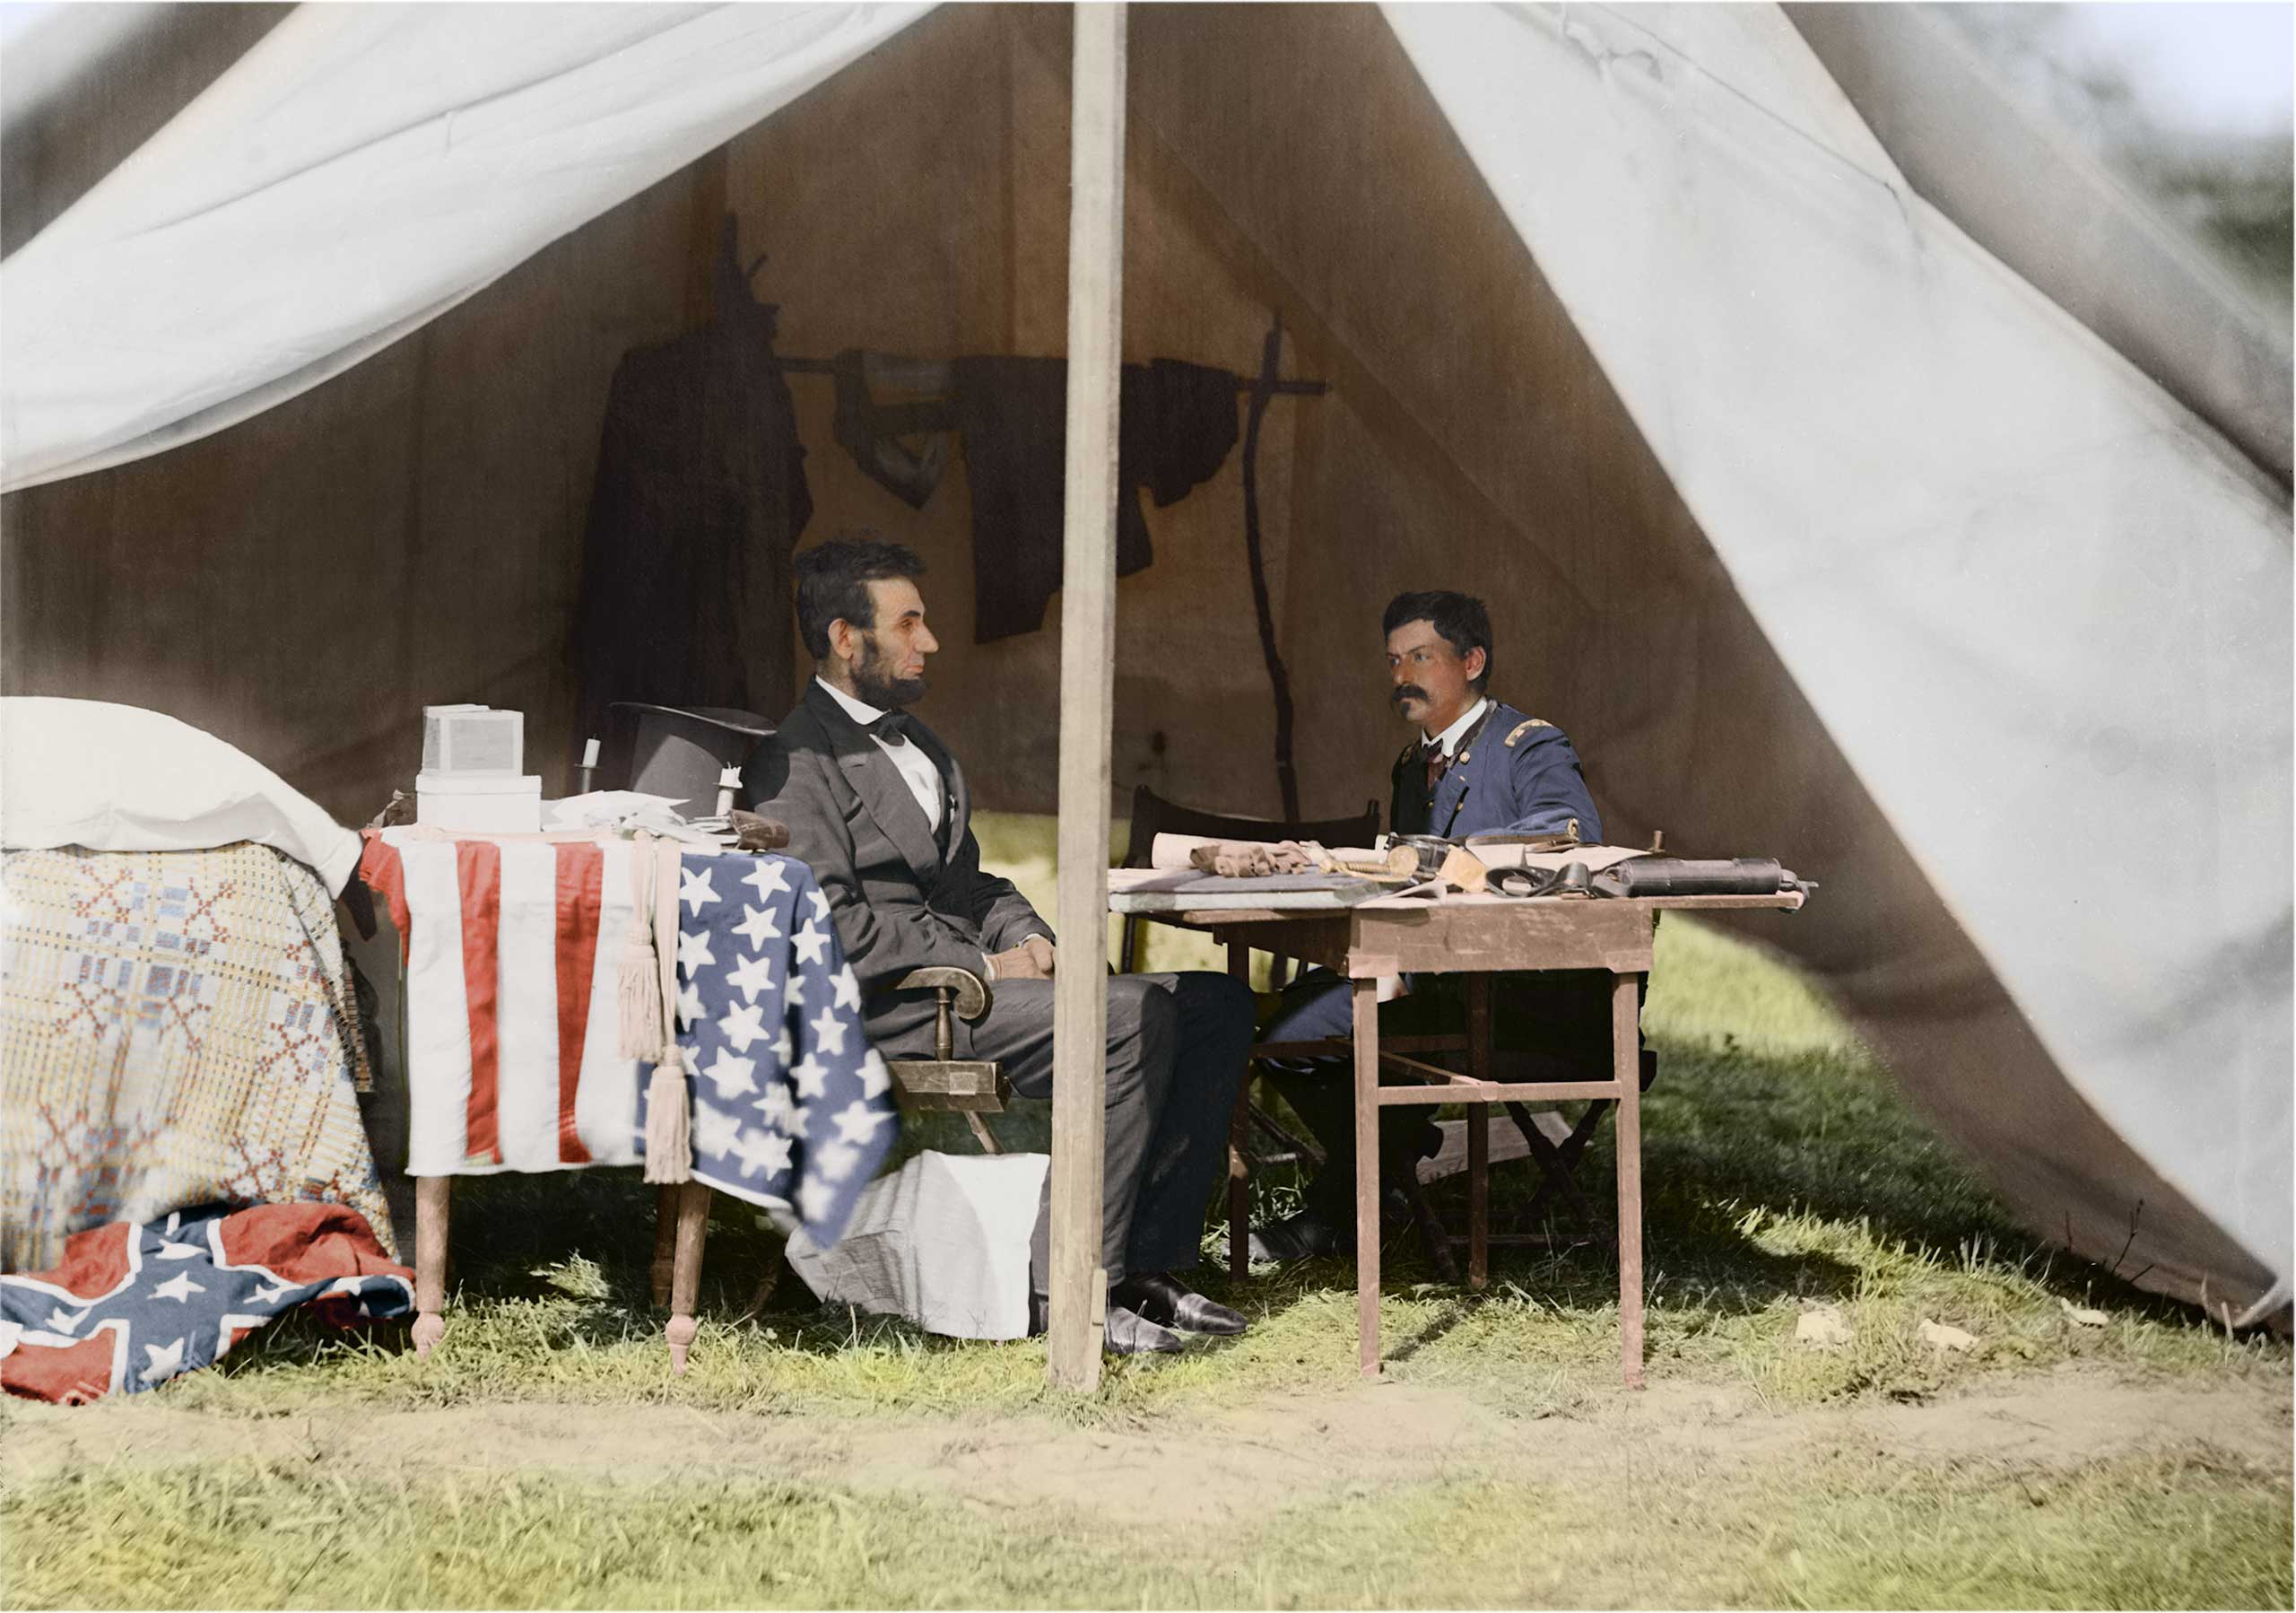 President Lincoln and Gen. George B. McClellan in the general's tent, Antietam, Md., Sept. - Oct. 1862.